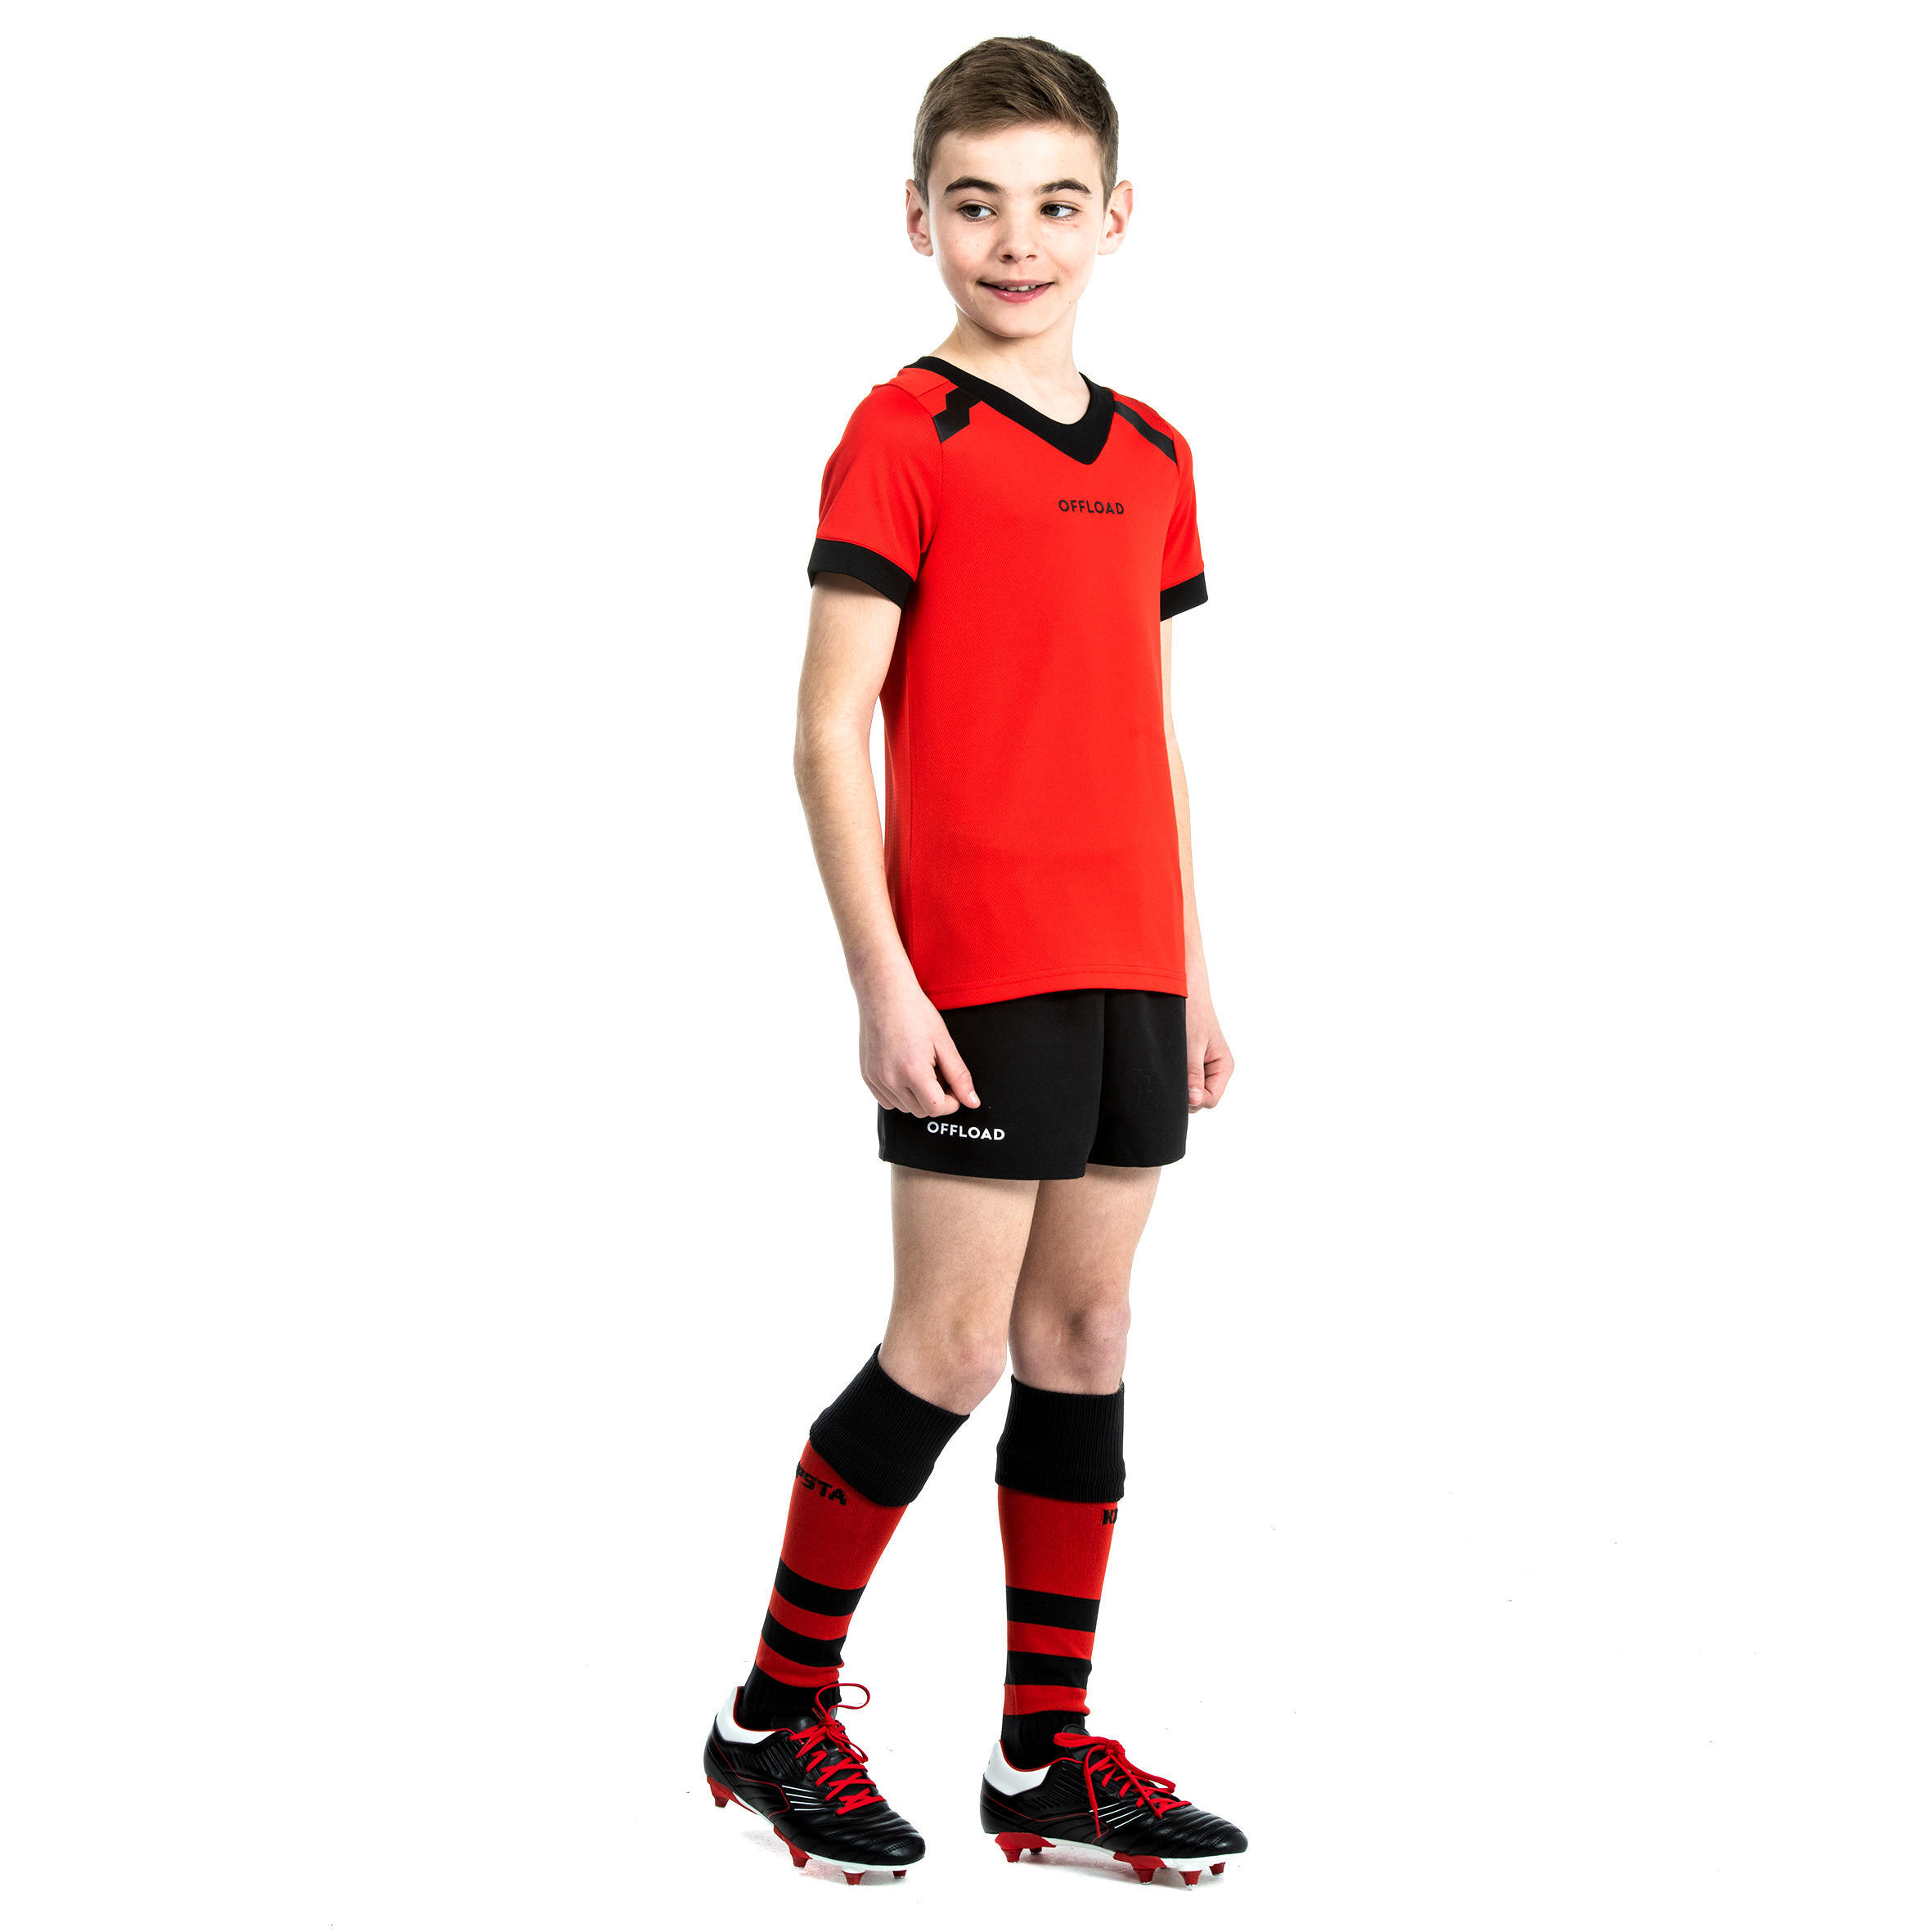 Refurbished Kids Rugby Shorts with Pockets R100 - A Grade 5/7